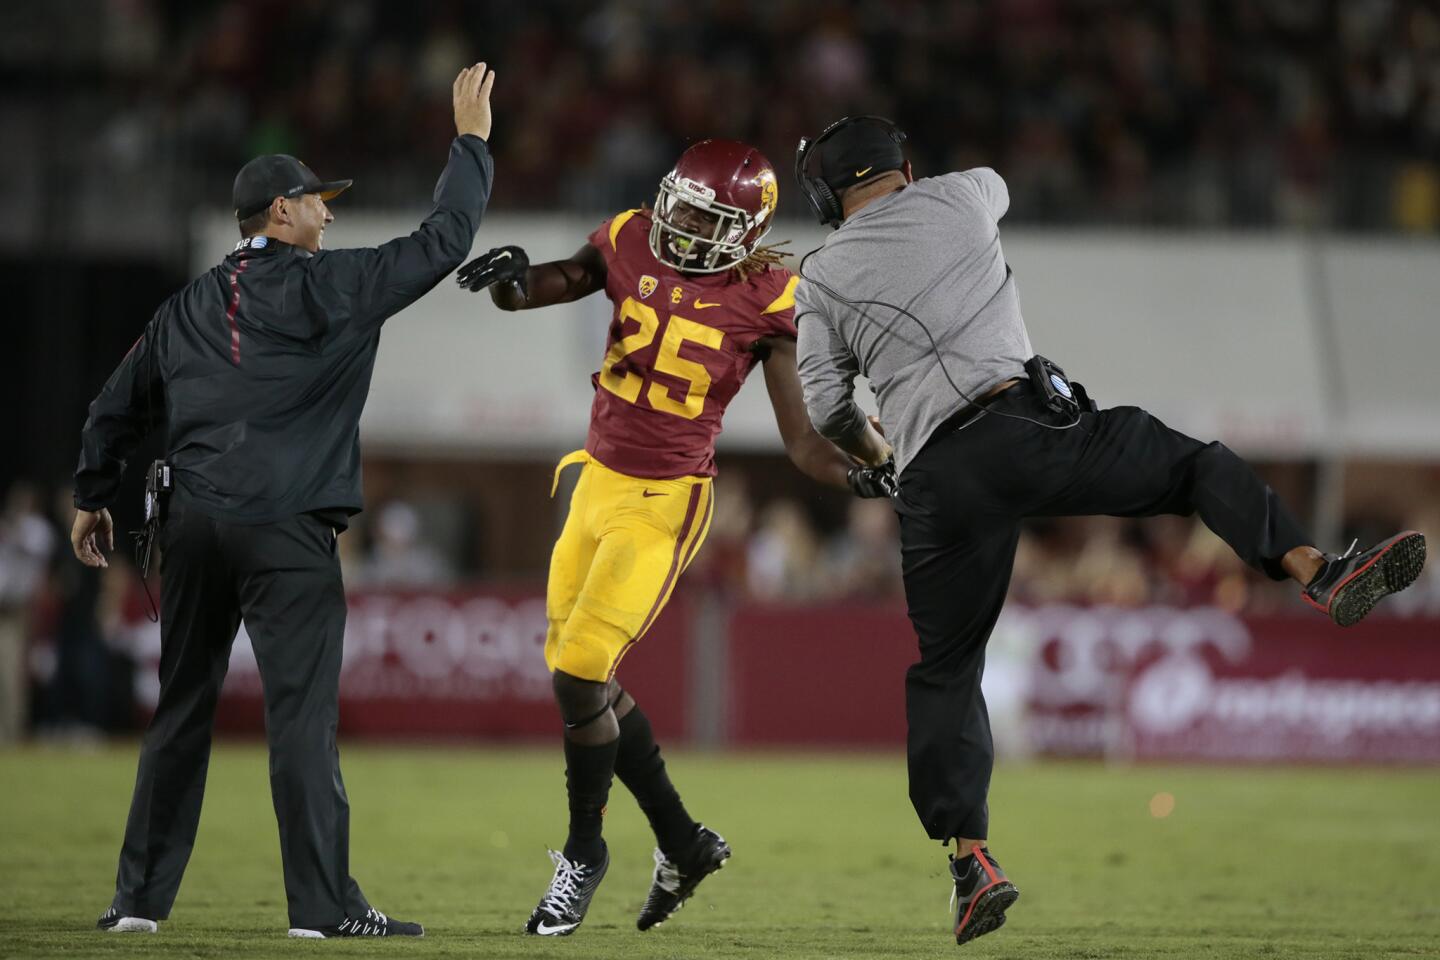 USC Coach Steve Sarkisian celebrates with tailback Ronald Jones after he scored a touchdown against Arkansas State in the third quarter on Saturday night at the Coliseum.